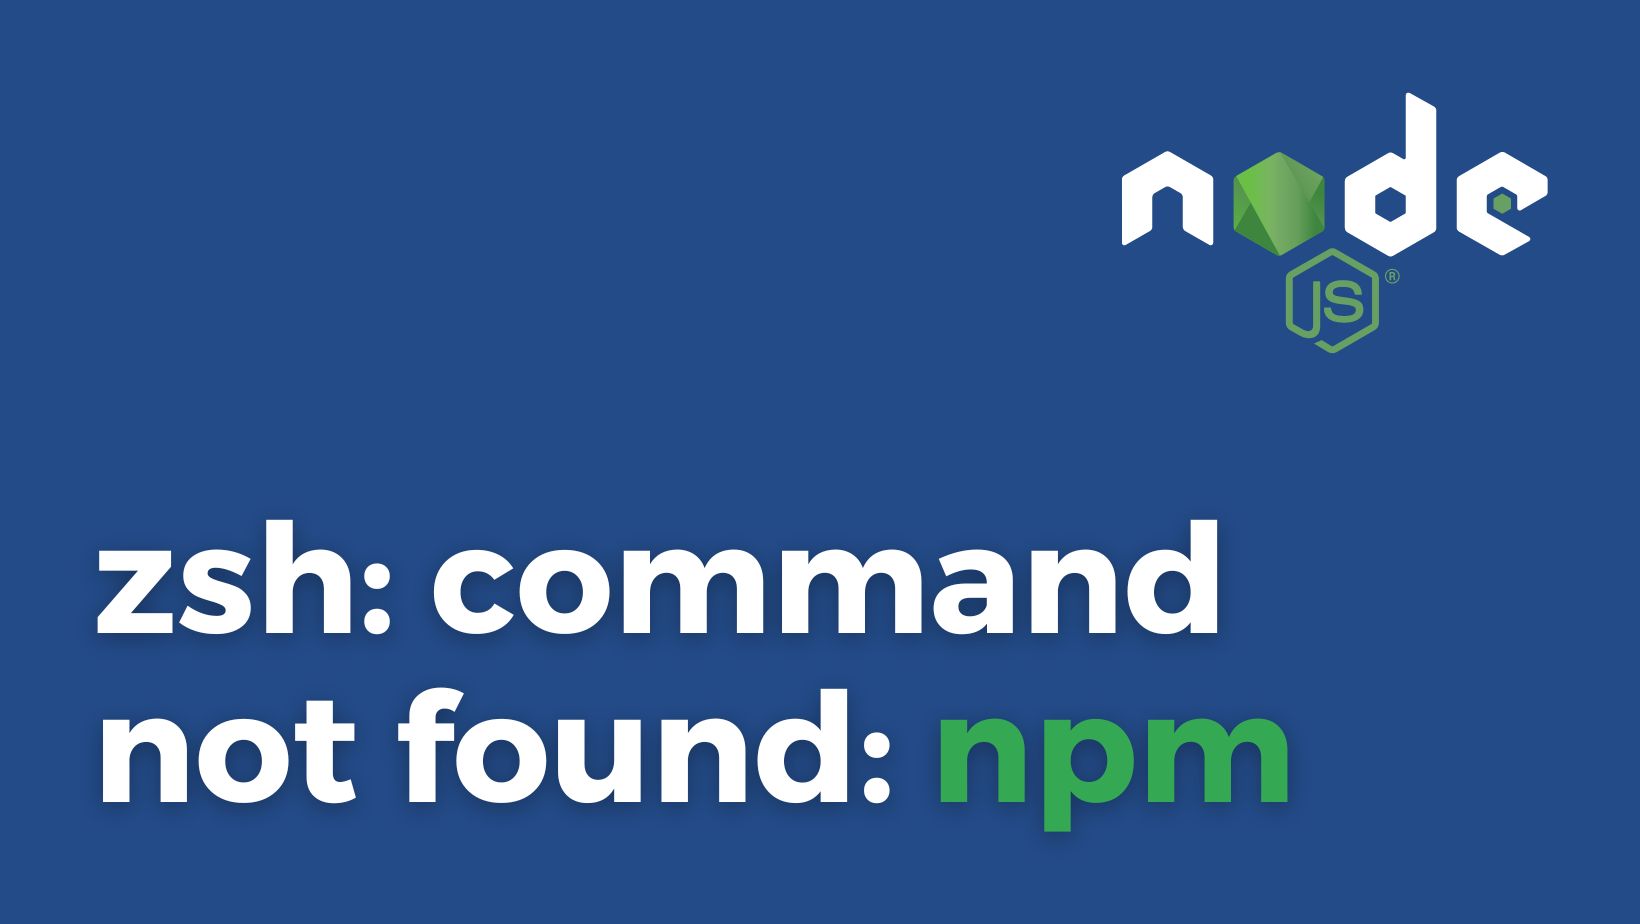 zsh: command not found: npm